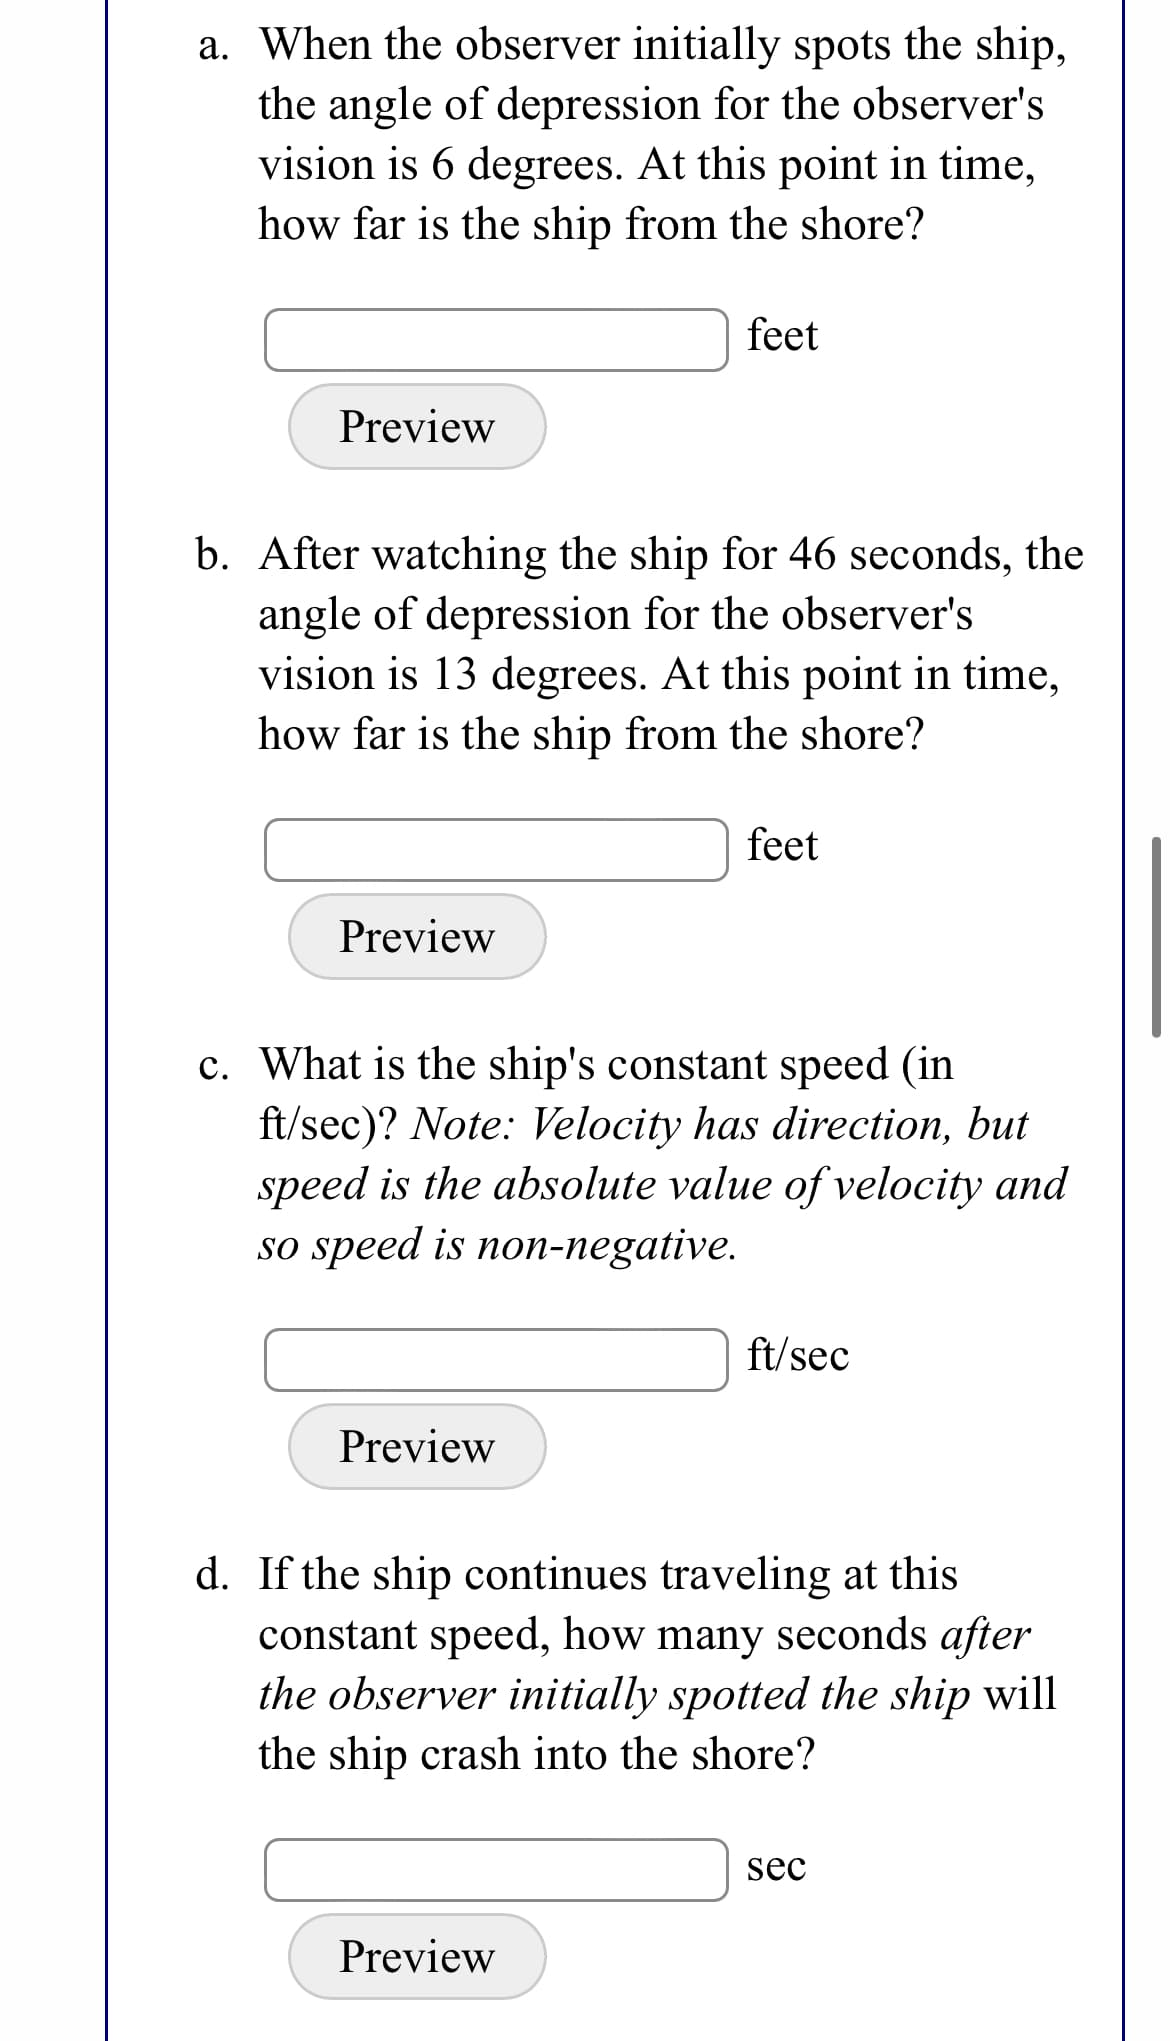 a. When the observer initially spots the ship,
the angle of depression for the observer's
vision is 6 degrees. At this point in time,
how far is the ship from the shore?
feet
Preview
b. After watching the ship for 46 seconds, the
angle of depression for the observer's
vision is 13 degrees. At this point in time,
how far is the ship from the shore?
feet
Preview
c. What is the ship's constant speed (in
ft/sec)? Note: Velocity has direction, but
speed is the absolute value of velocity and
so speed is non-negative.
ft/sec
Preview
d. If the ship continues traveling at this
constant speed, how many seconds after
the observer initially spotted the ship will
the ship crash into the shore?
sec
Preview
